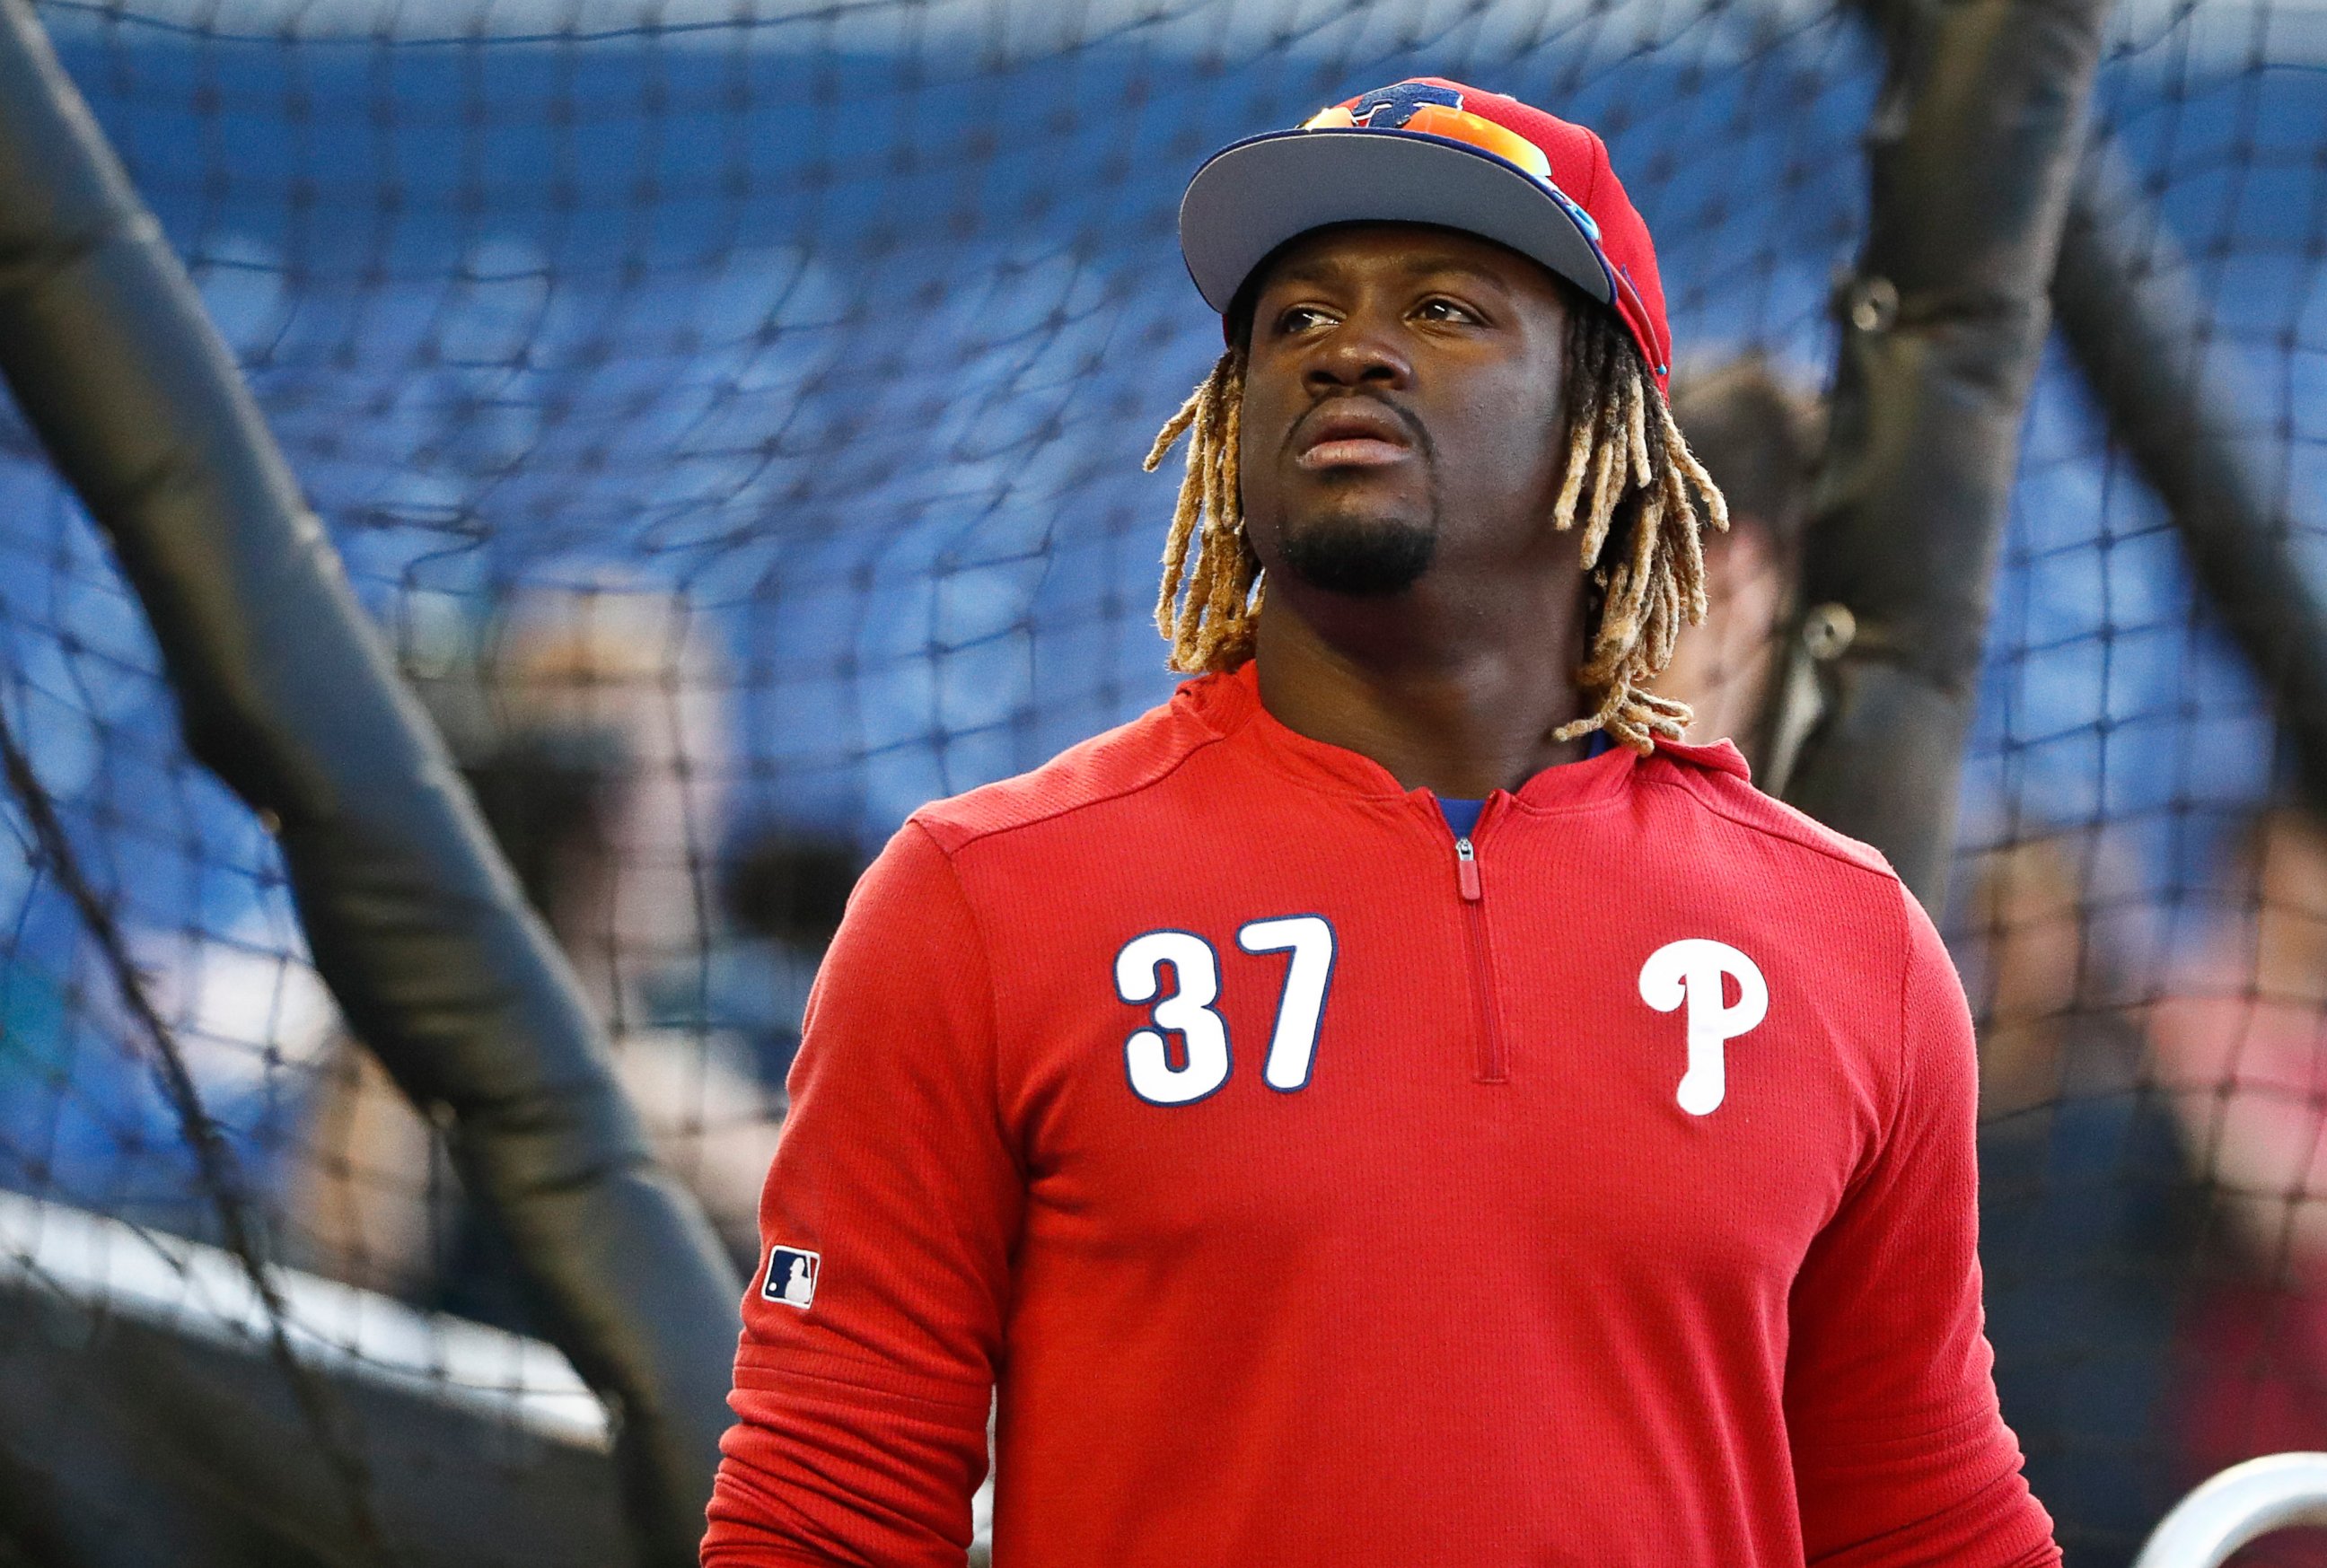 PHOTO: In this April 12, 2019, file photo, Philadelphia Phillies center fielder Odubel Herrera (37) practices before a baseball game against the Miami Marlins, in Miami.